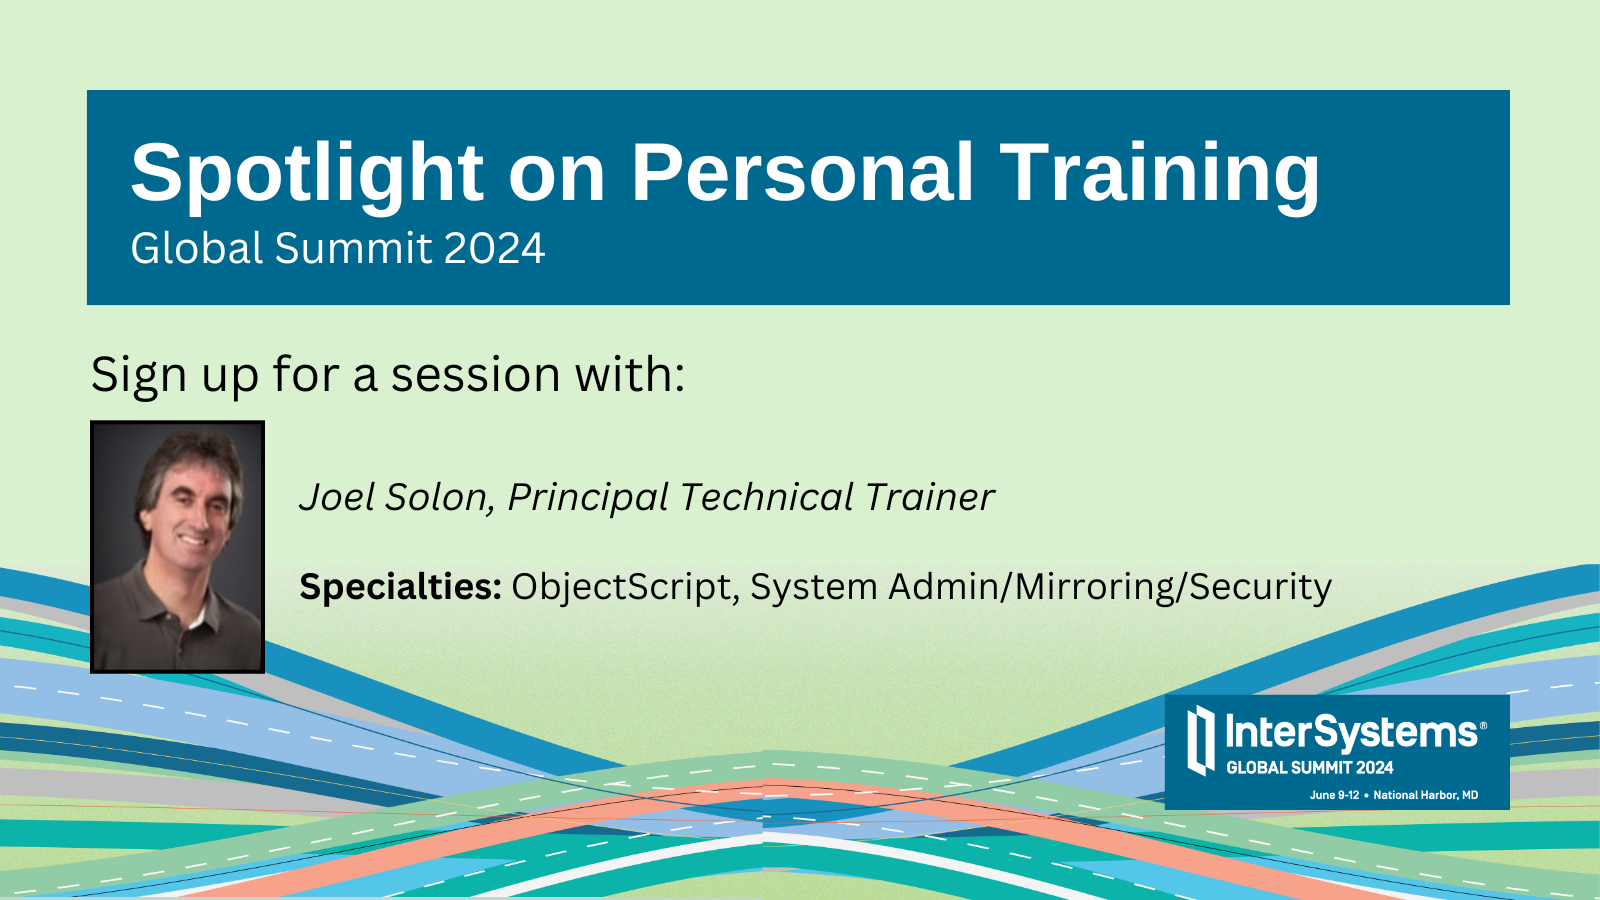 Spotlight on personal training, Global Summit. Sign up for a session with Joel Solon, Principal Technical Trainer.